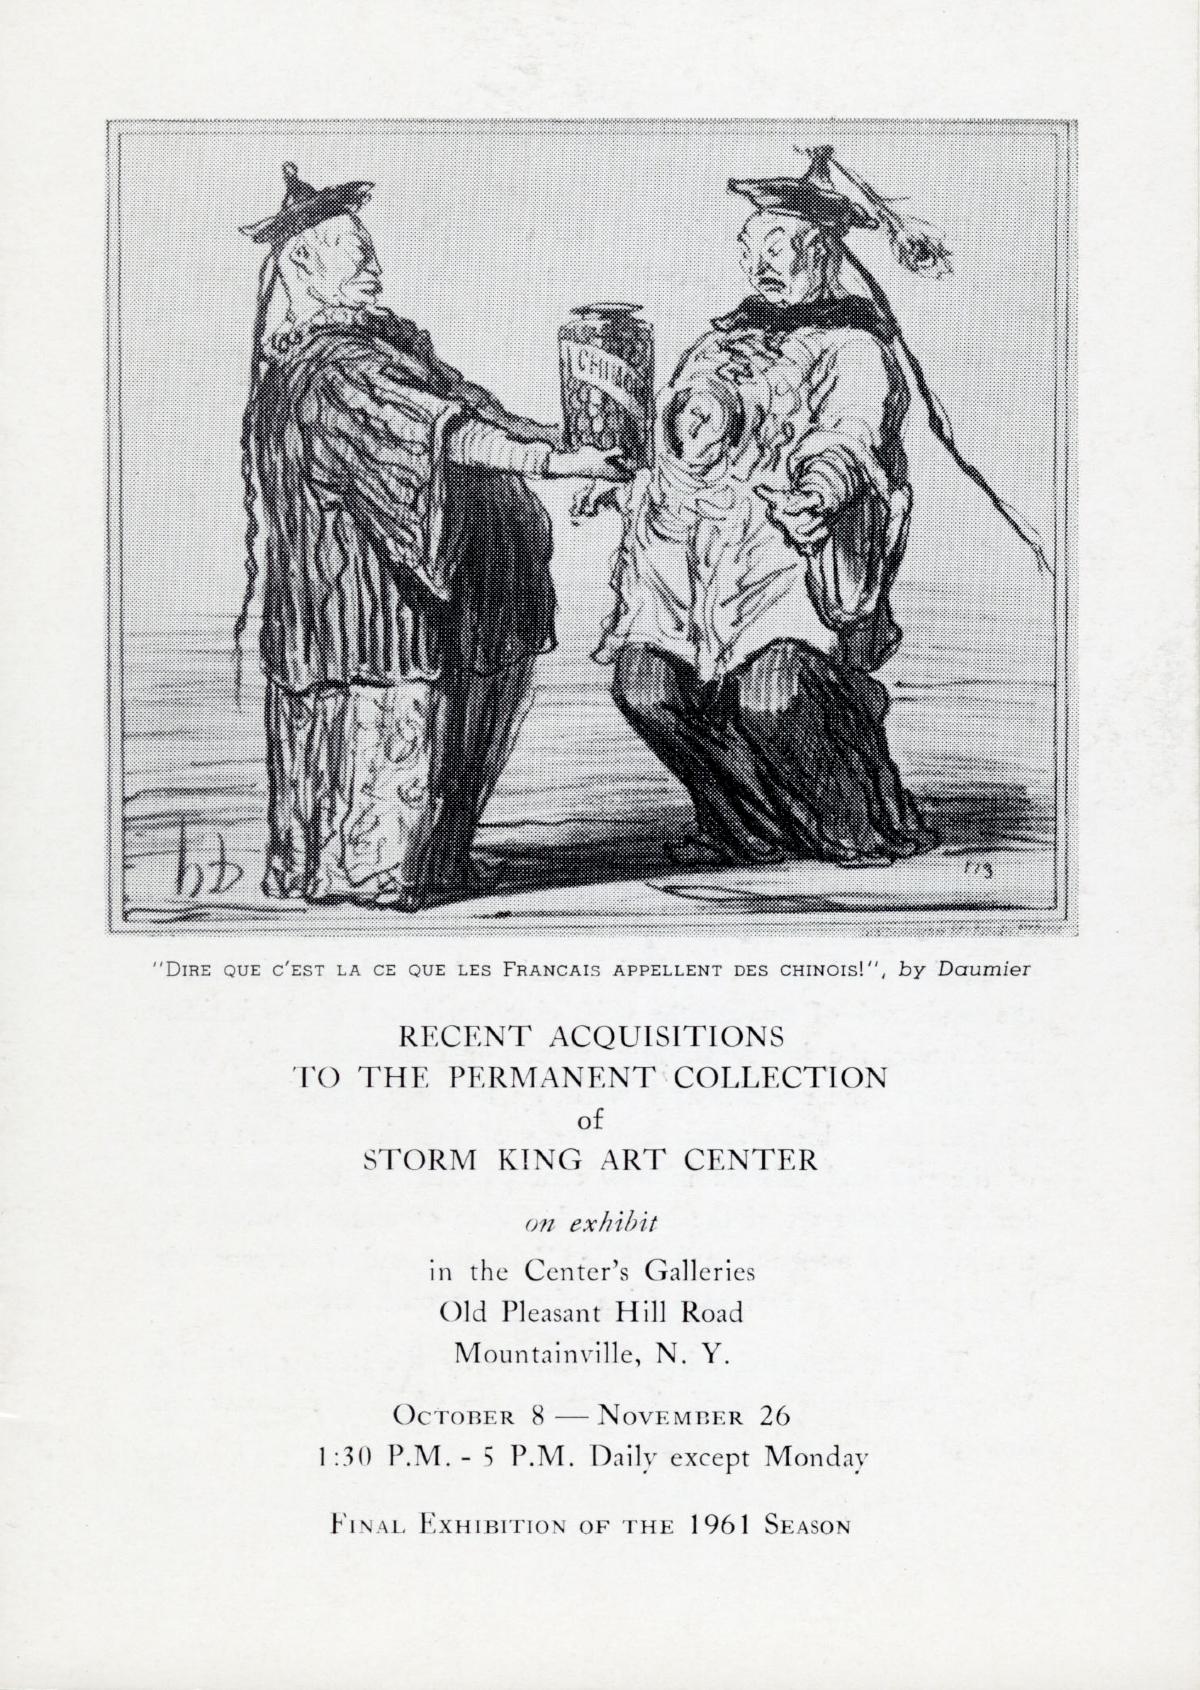 Recent Acquisitions to the Permanent Collection of Storm King Art Center, October 8–November 26, 1961, catalogue cover